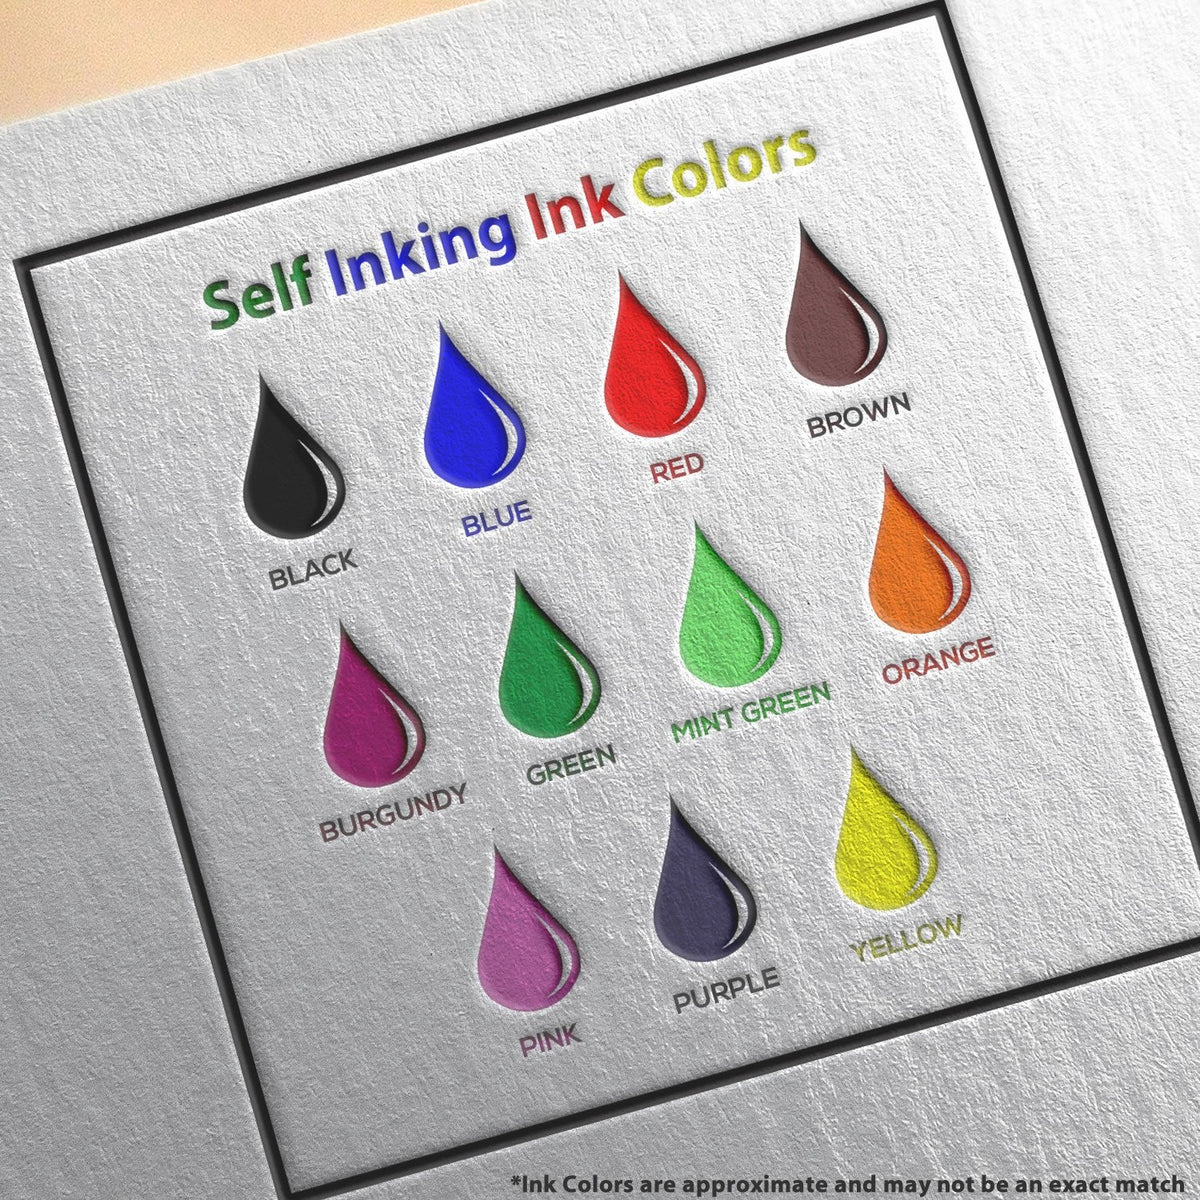 Self-Inking Non-Smoker Stamp Ink Color Options